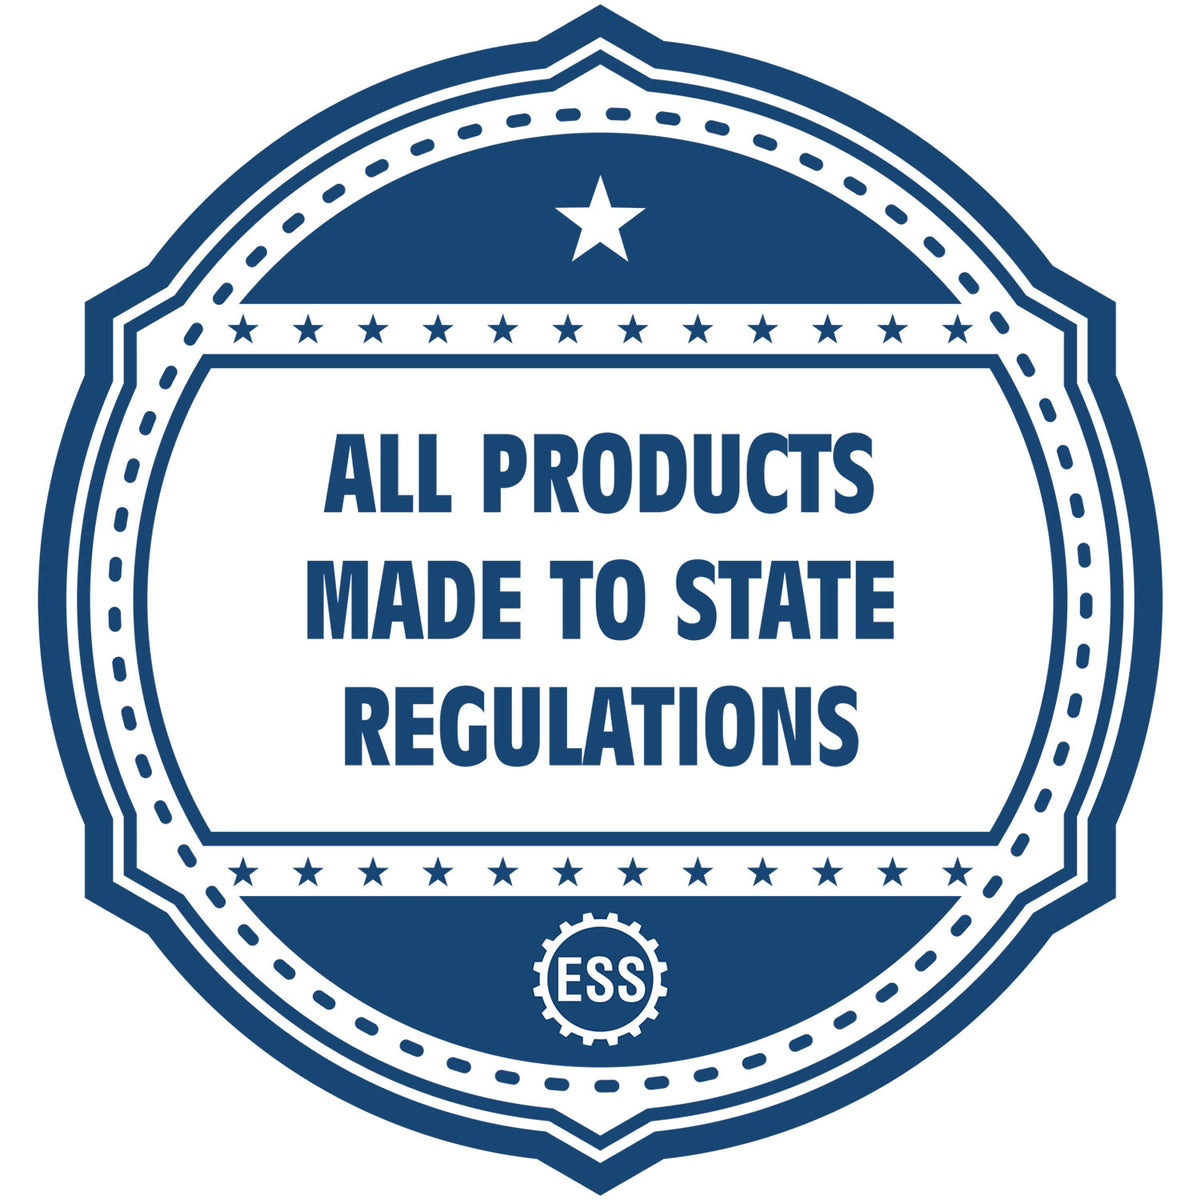 A blue icon or badge for the Gift Ohio Geologist Seal showing that this product is made in compliance with state regulations.